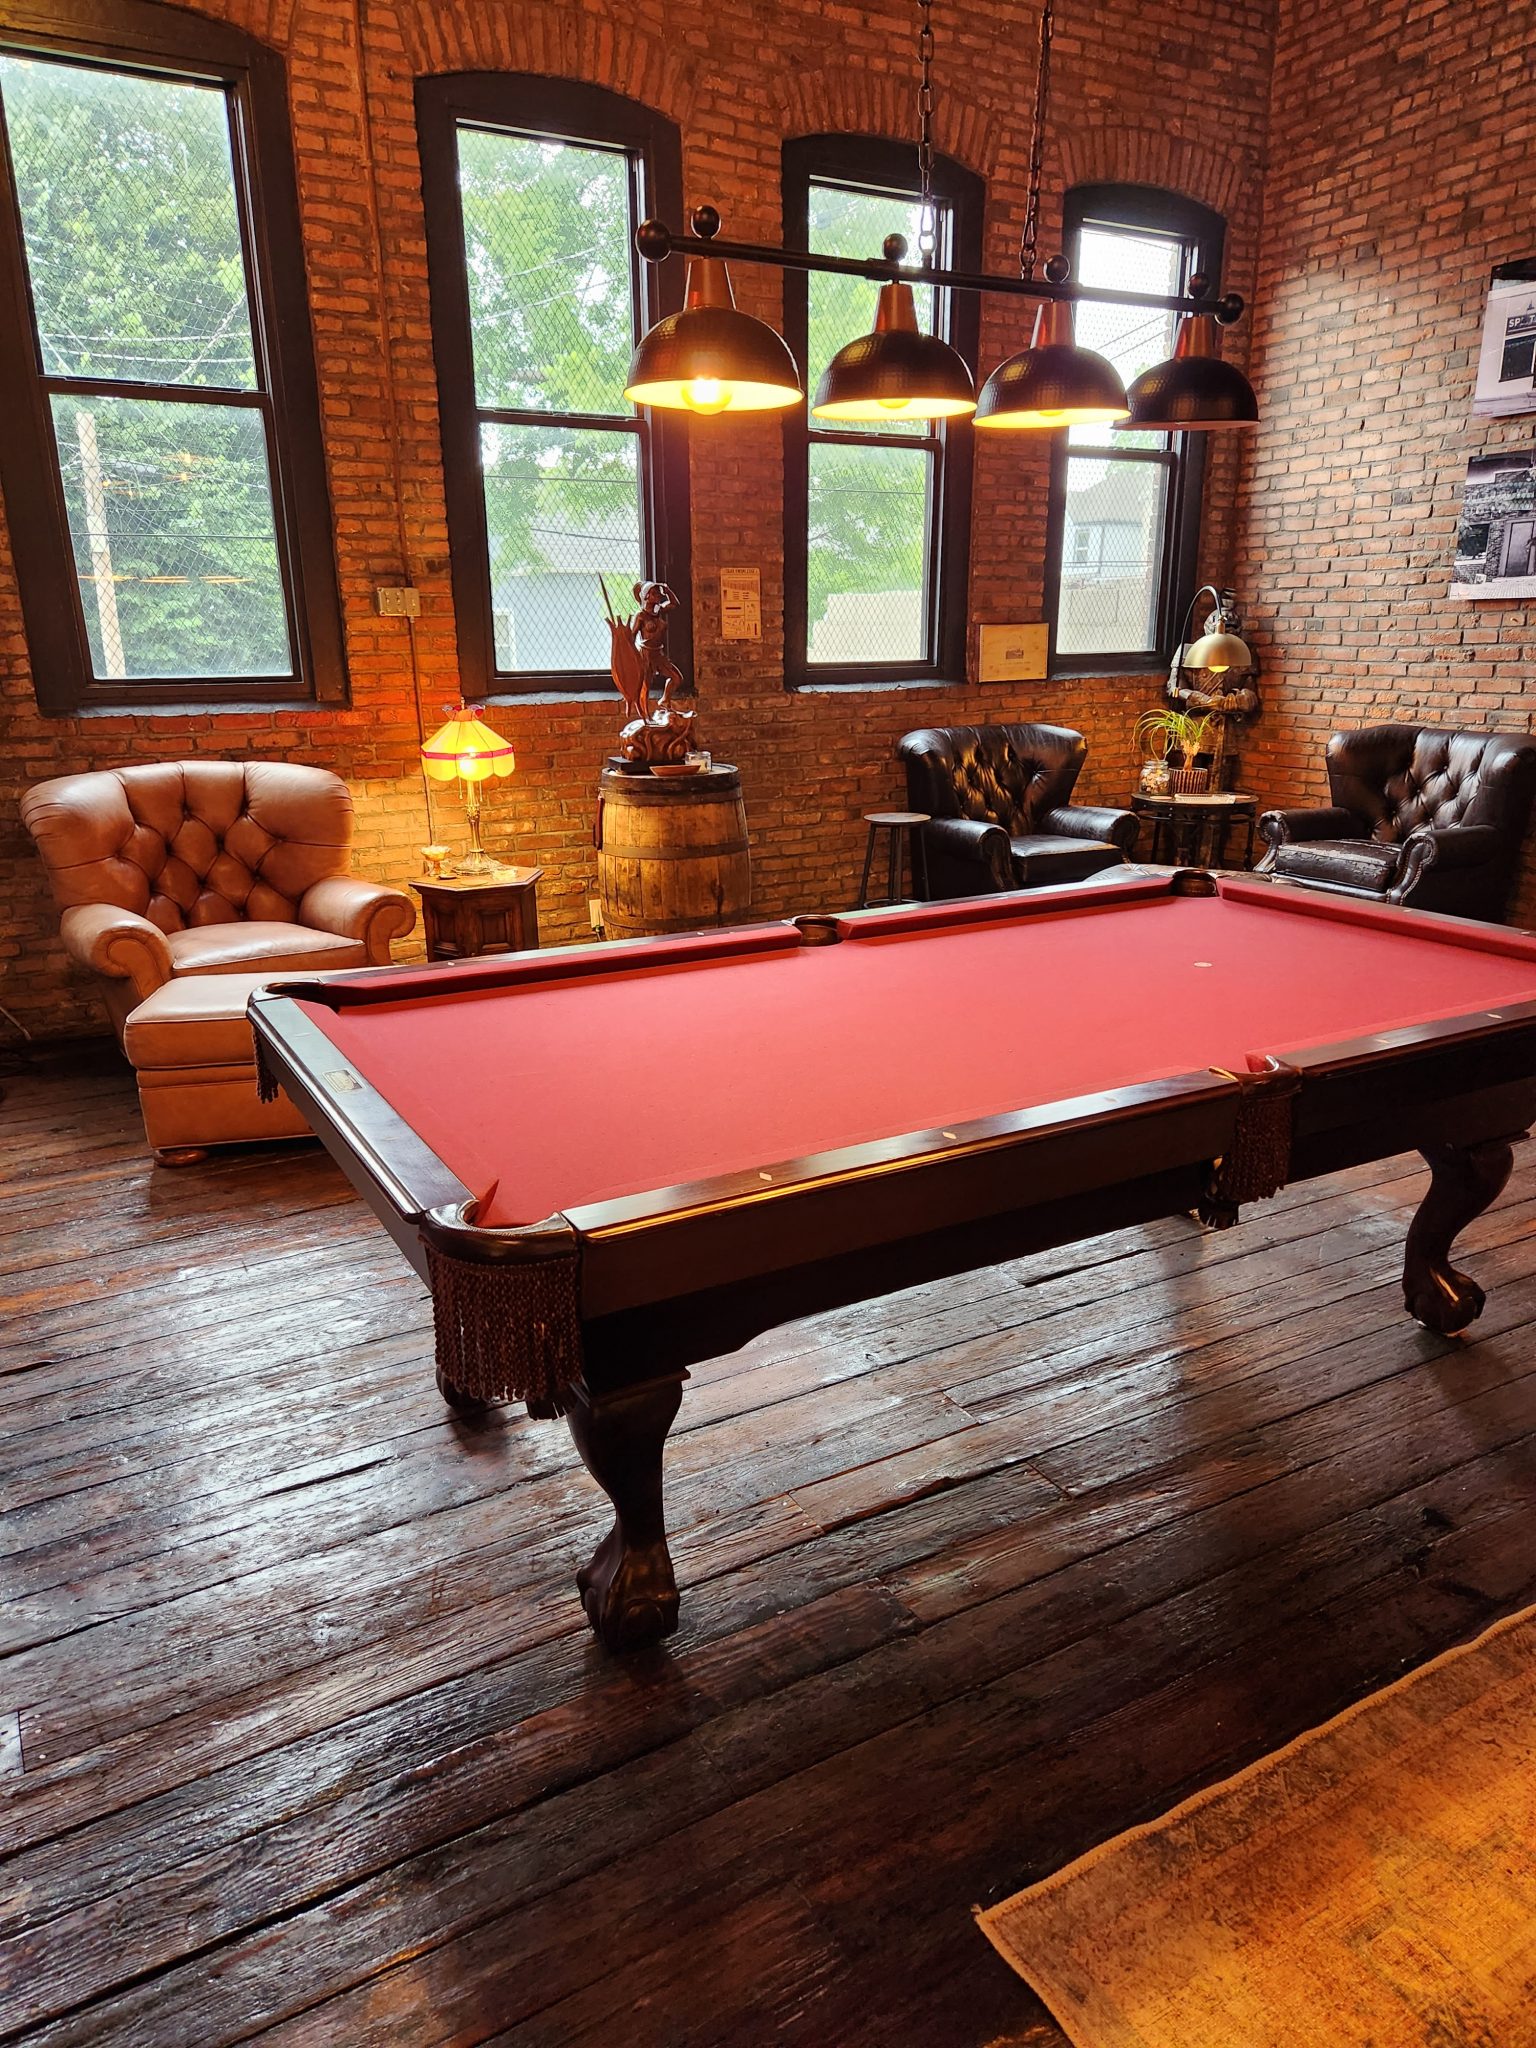 Lounge room with pool table